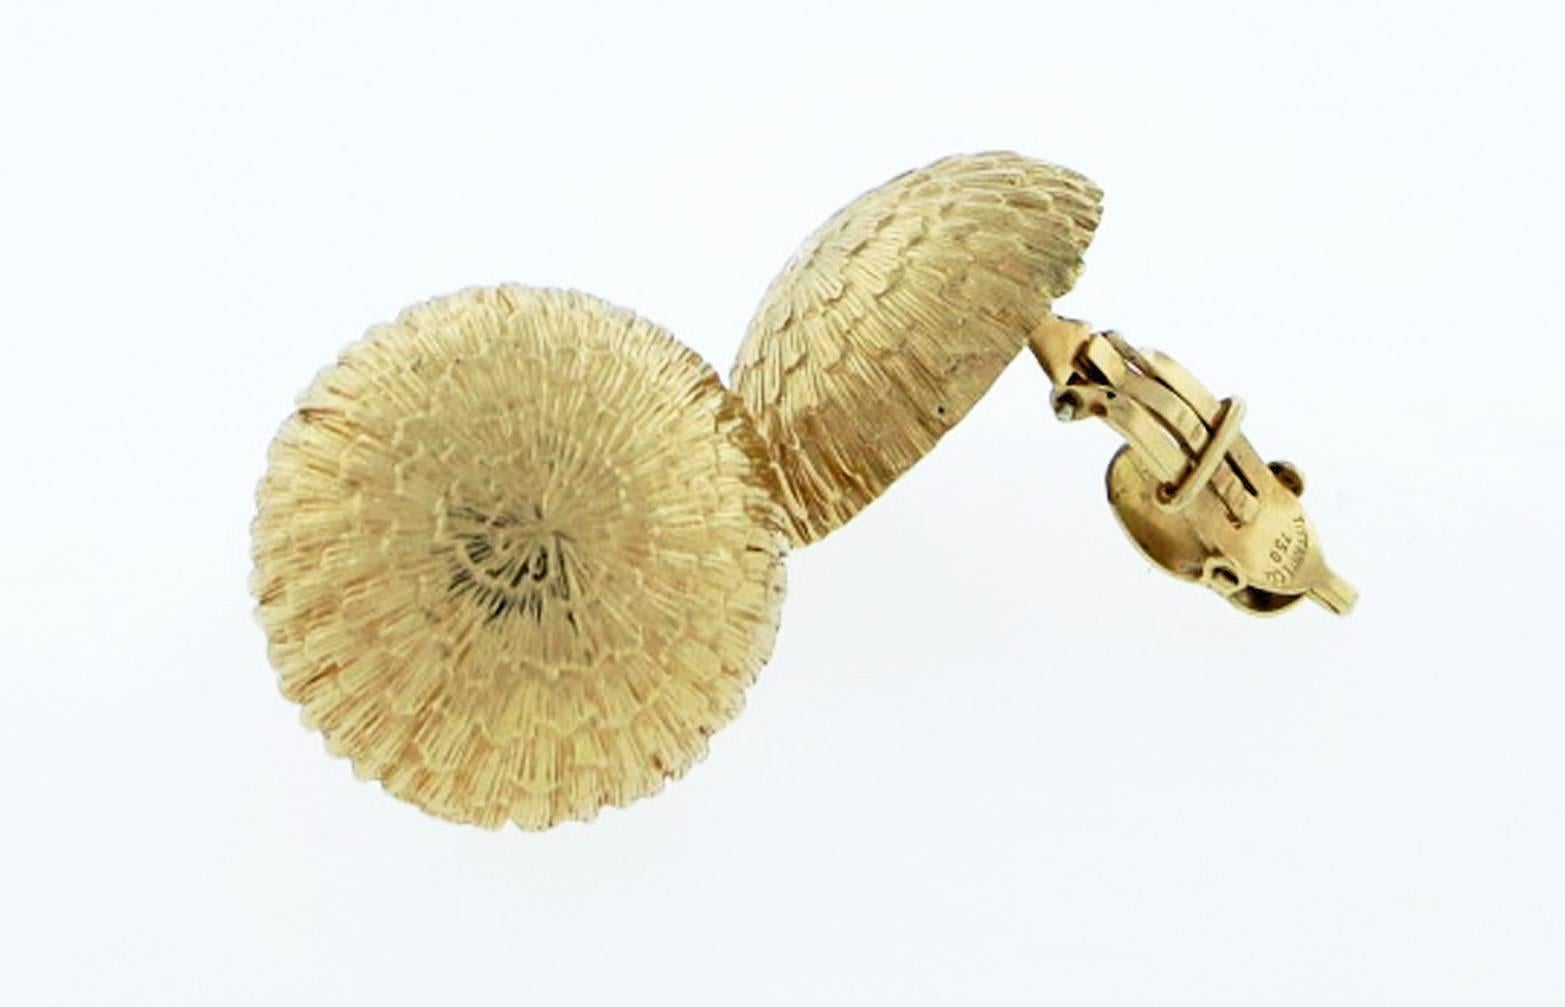 Clip on half dome textured Tiffany & Co. 18kt. yellow gold earrings. Each earring measures approx 1 inch in diameter. The earring backs have hinged pads that fit comfortably on the ear. 